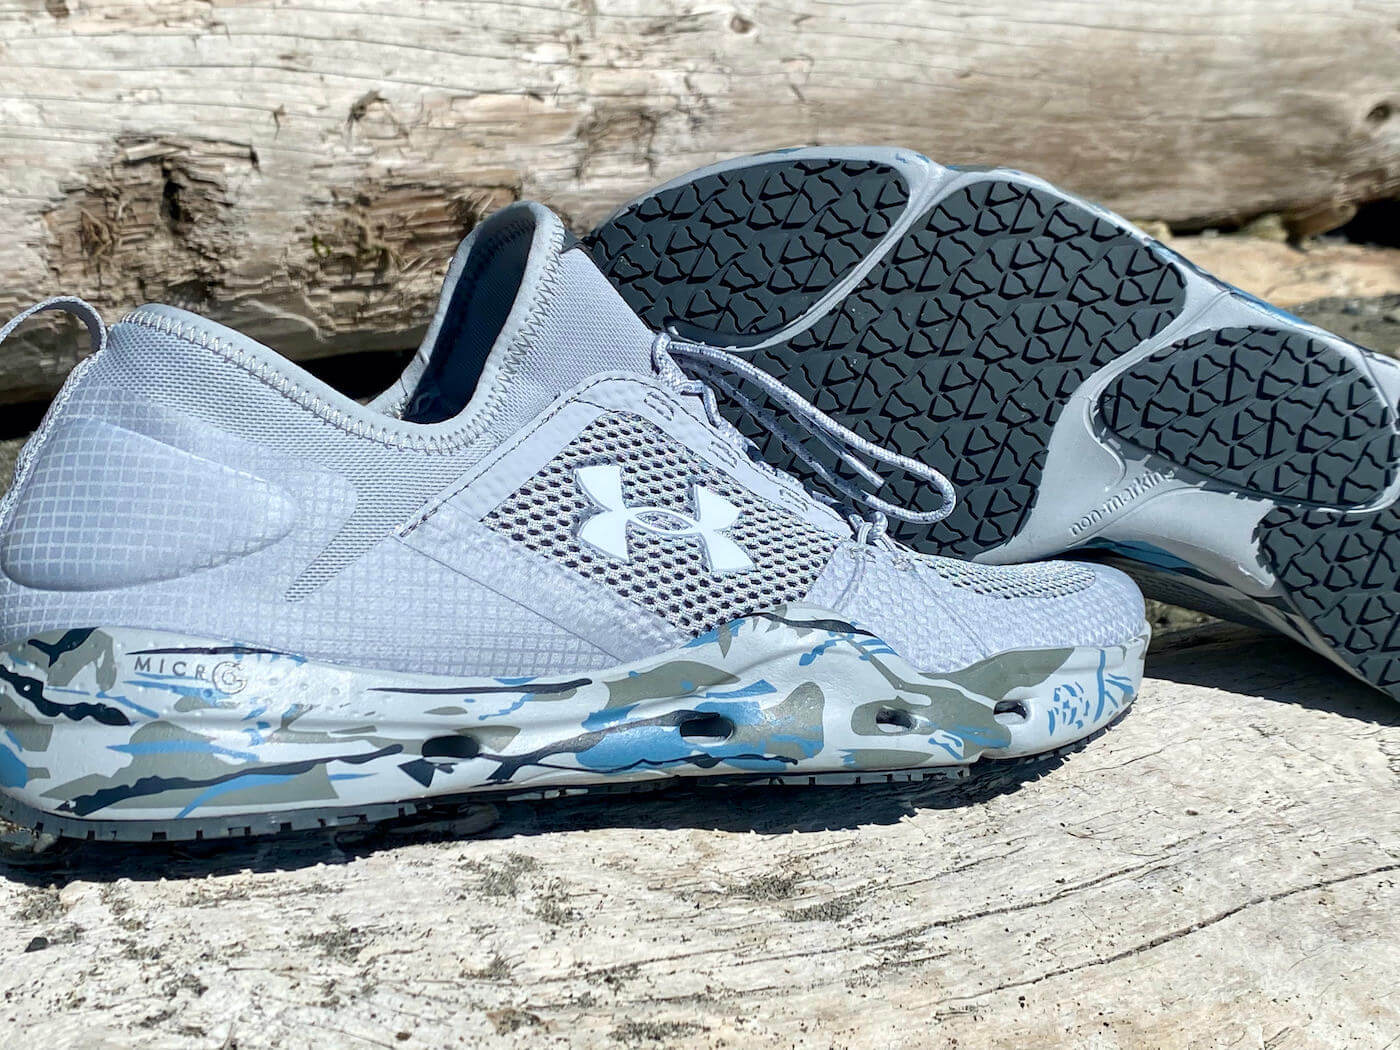 This review photo shows the men's UA Kilchis Fishing Shoes on a log at the beach.